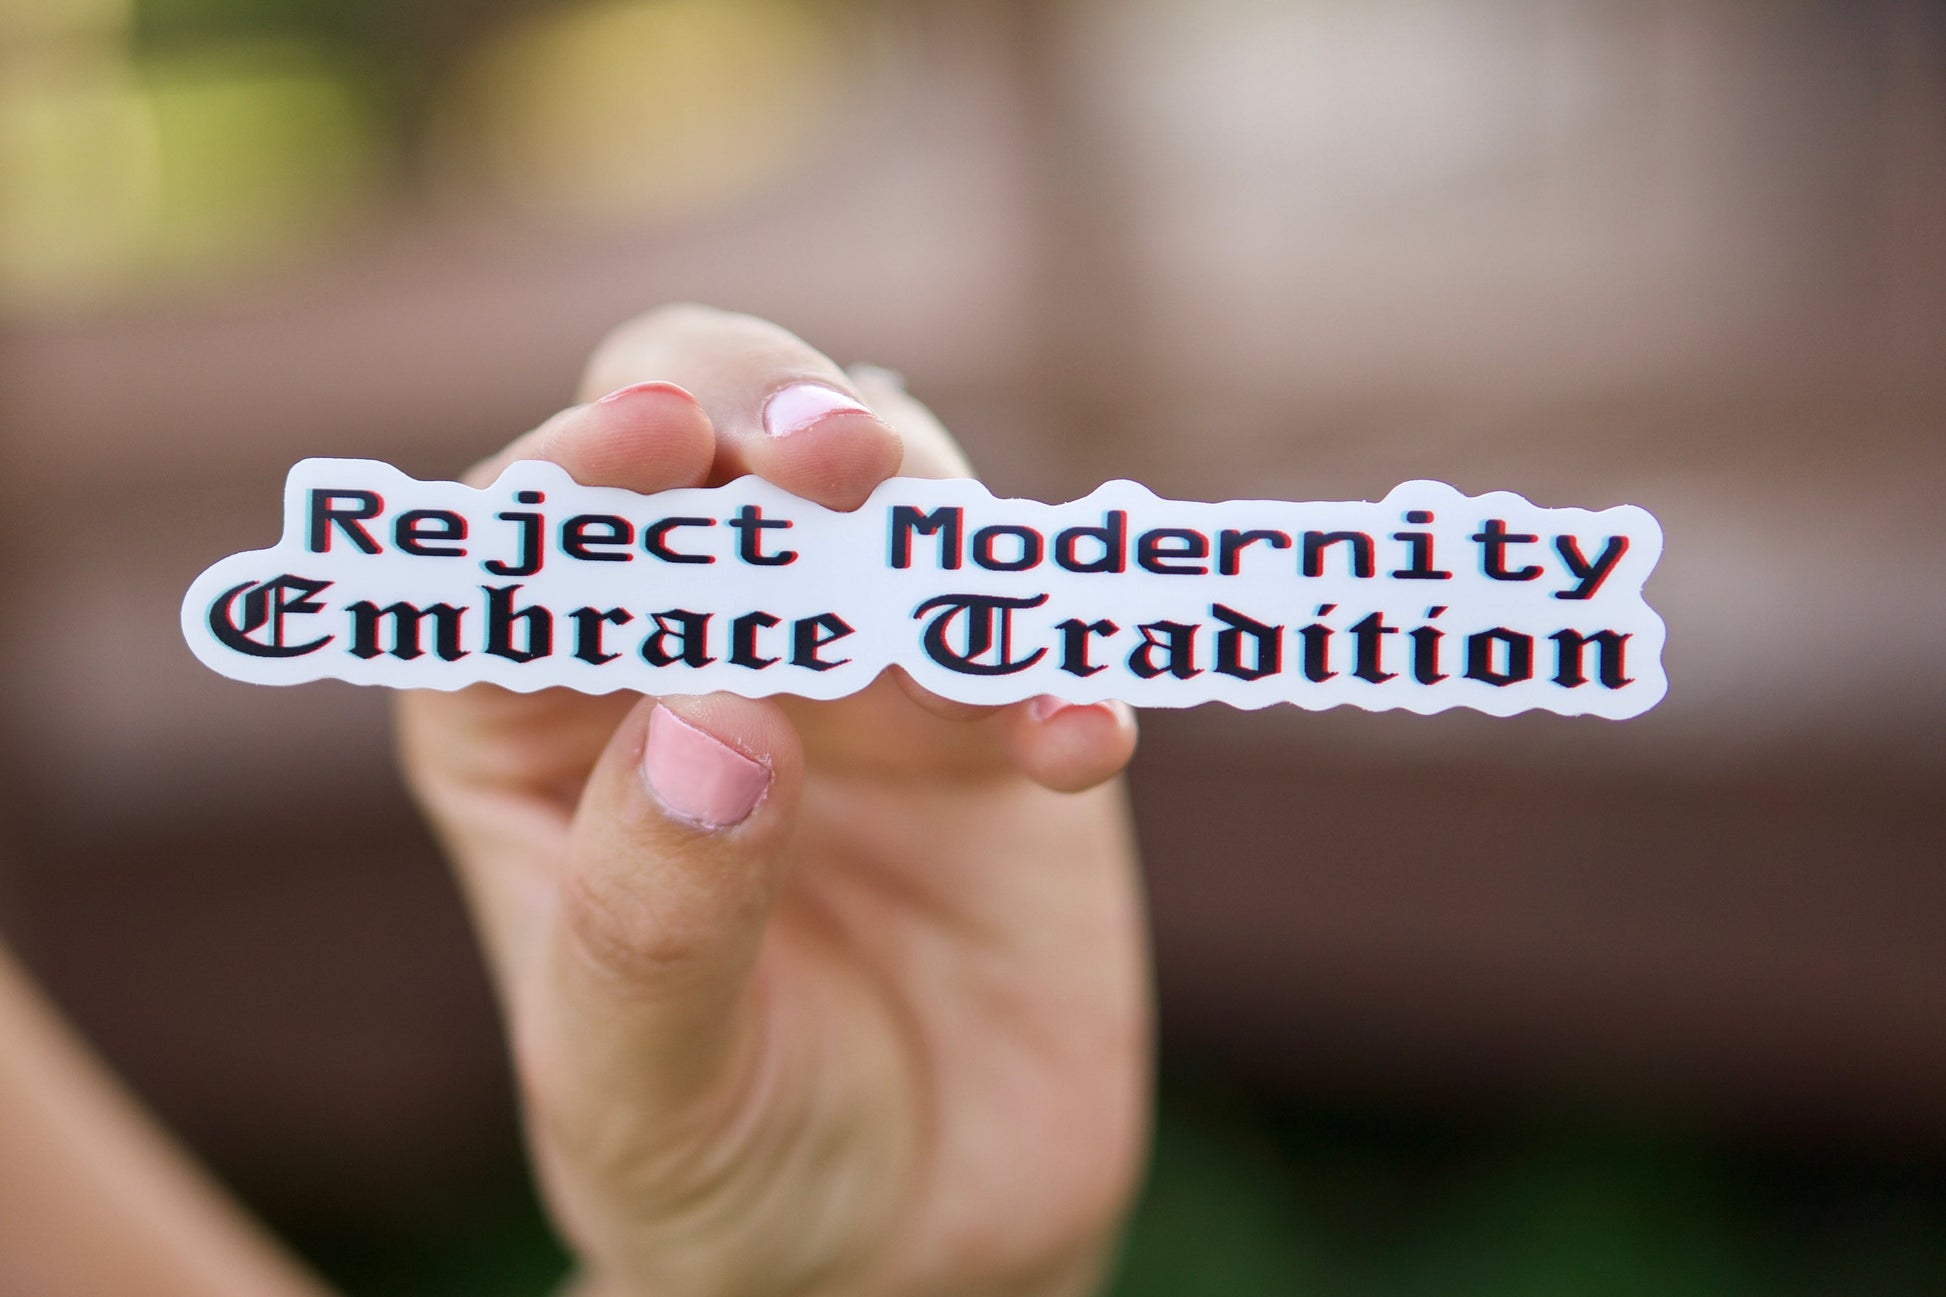 Embrace Catholic Tradition with Our Reject Modernity Vinyl Sticker - A perfect accessory for those who stand against modernism and support timeless faith traditions. This durable, dishwasher-safe sticker is ideal for laptops, water bottles, notebooks or any other surface, reminding you of the battle we face in preserving our Catholic beliefs. 